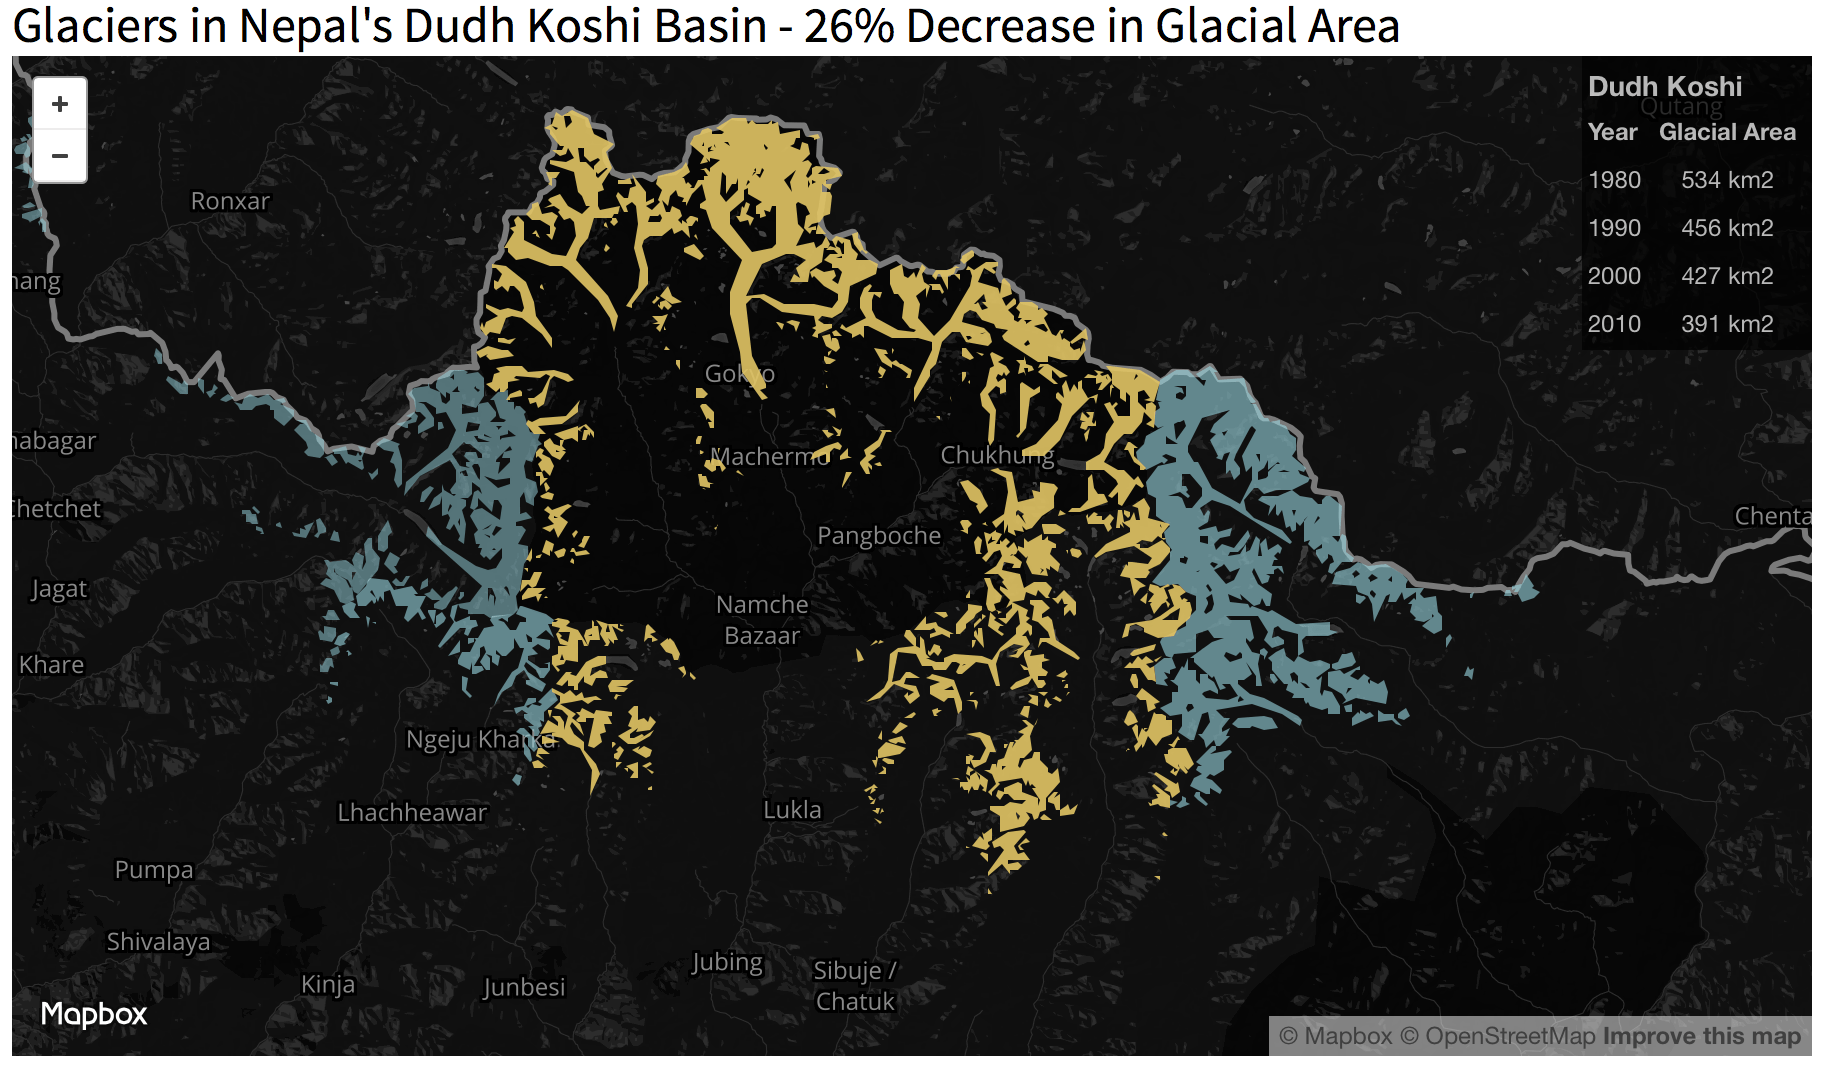 From 1980 to 2010, the Dudh Koshi has lost over 140 square kilometres of glacier area. Click the image to explore the animated visualisation.